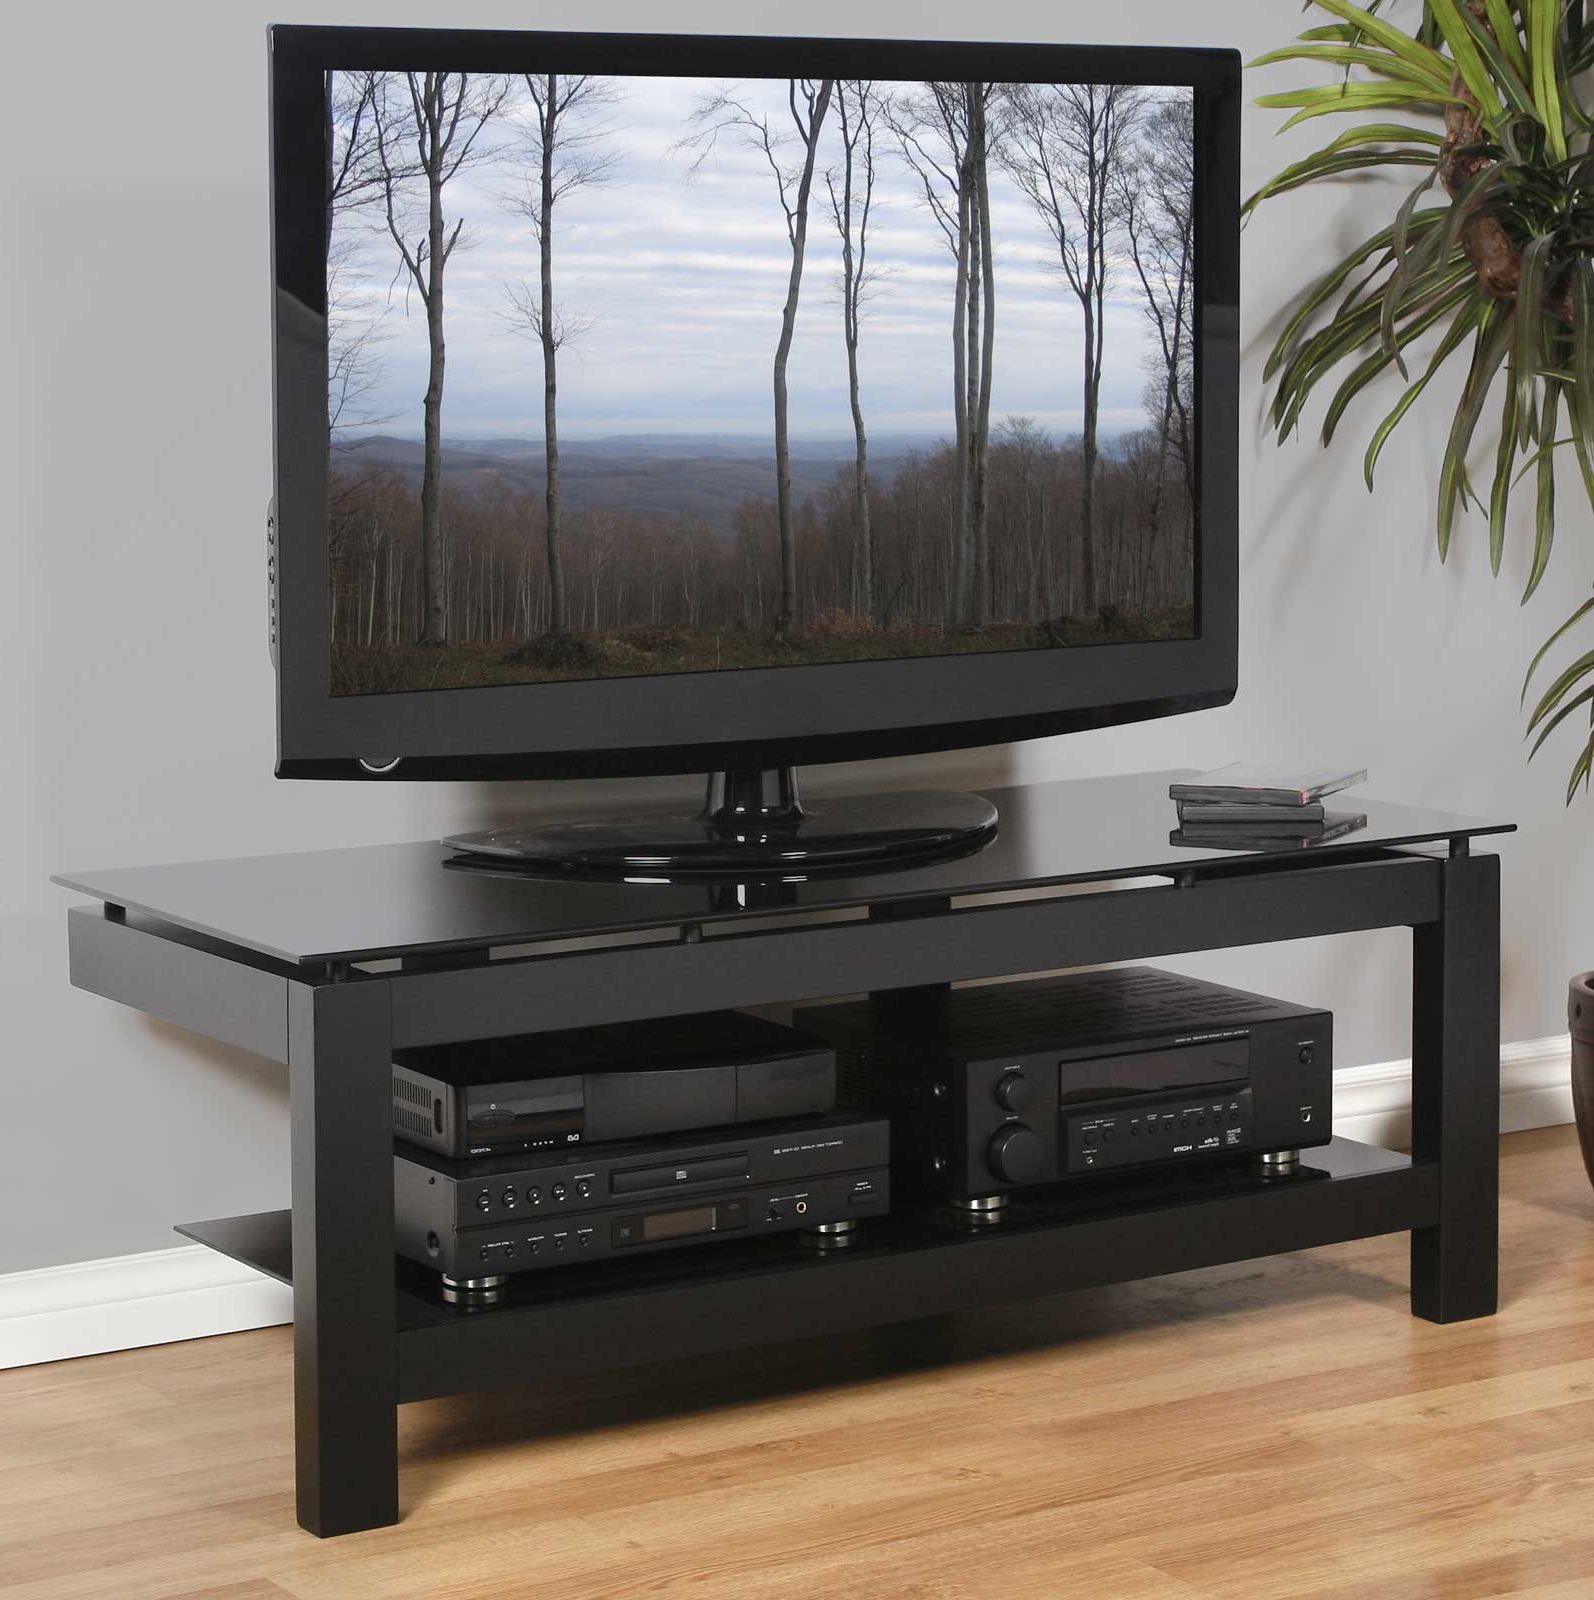 Widely Used Low Profile 50 Inch Tv Stand – Black In Tv Stands Throughout Glass Shelves Tv Stands For Tvs Up To 50" (View 5 of 10)